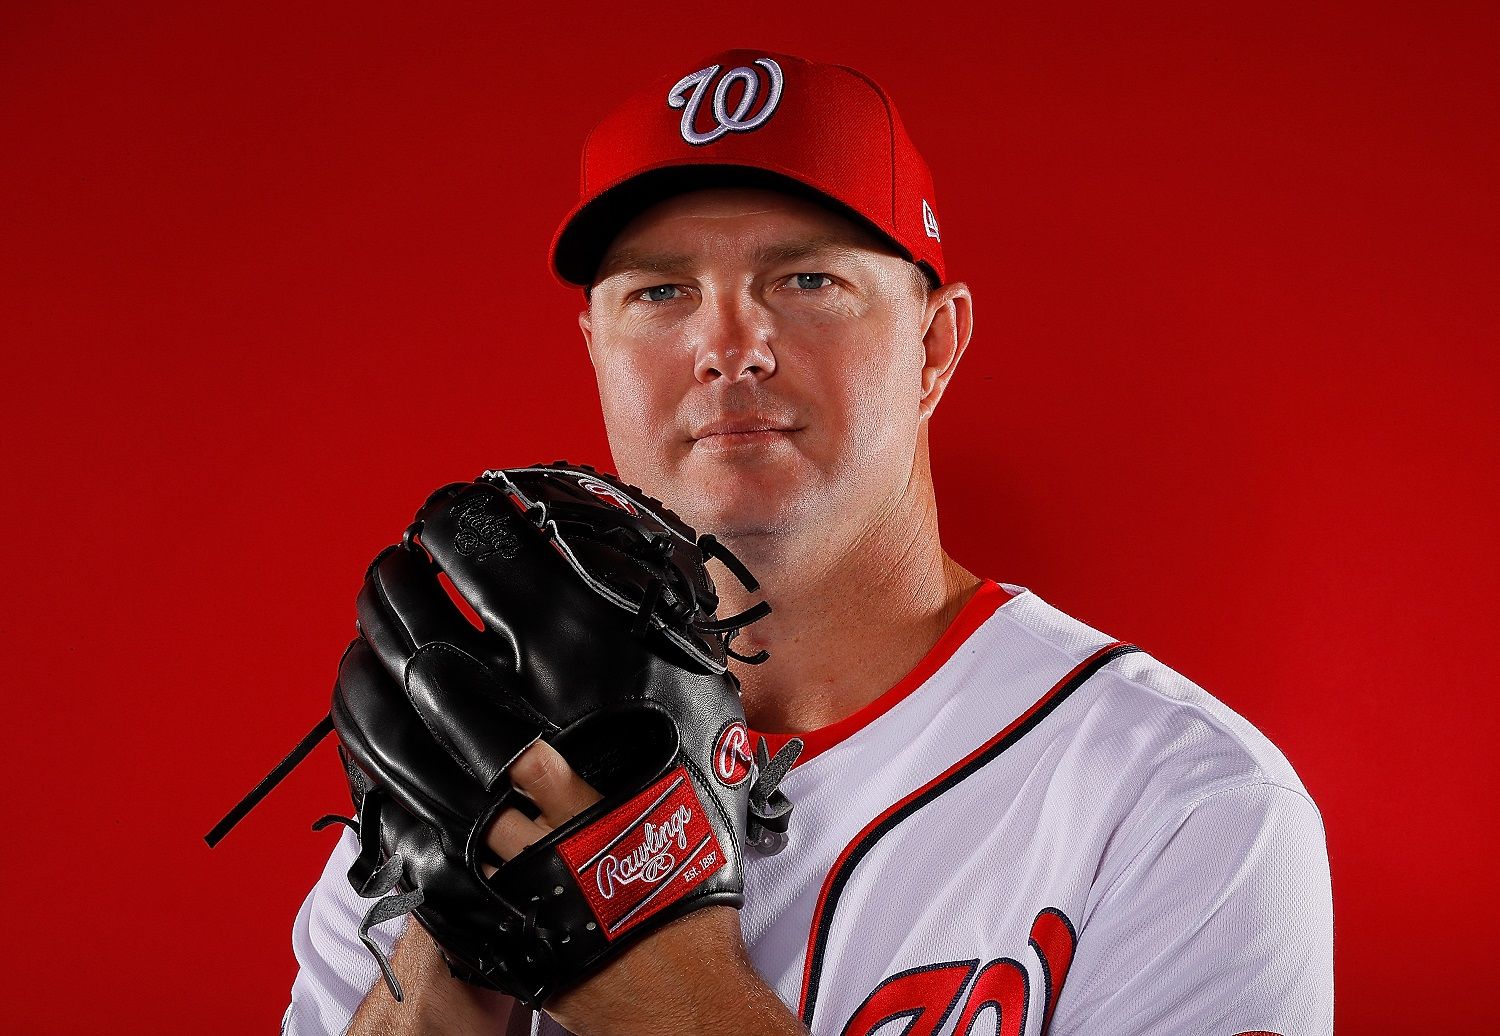 WEST PALM BEACH, FL - FEBRUARY 22:  Ryan Madson #44 of the Washington Nationals poses for a photo during photo days at The Ballpark of the Palm Beaches on February 22, 2018 in West Palm Beach, Florida.  (Photo by Kevin C. Cox/Getty Images)